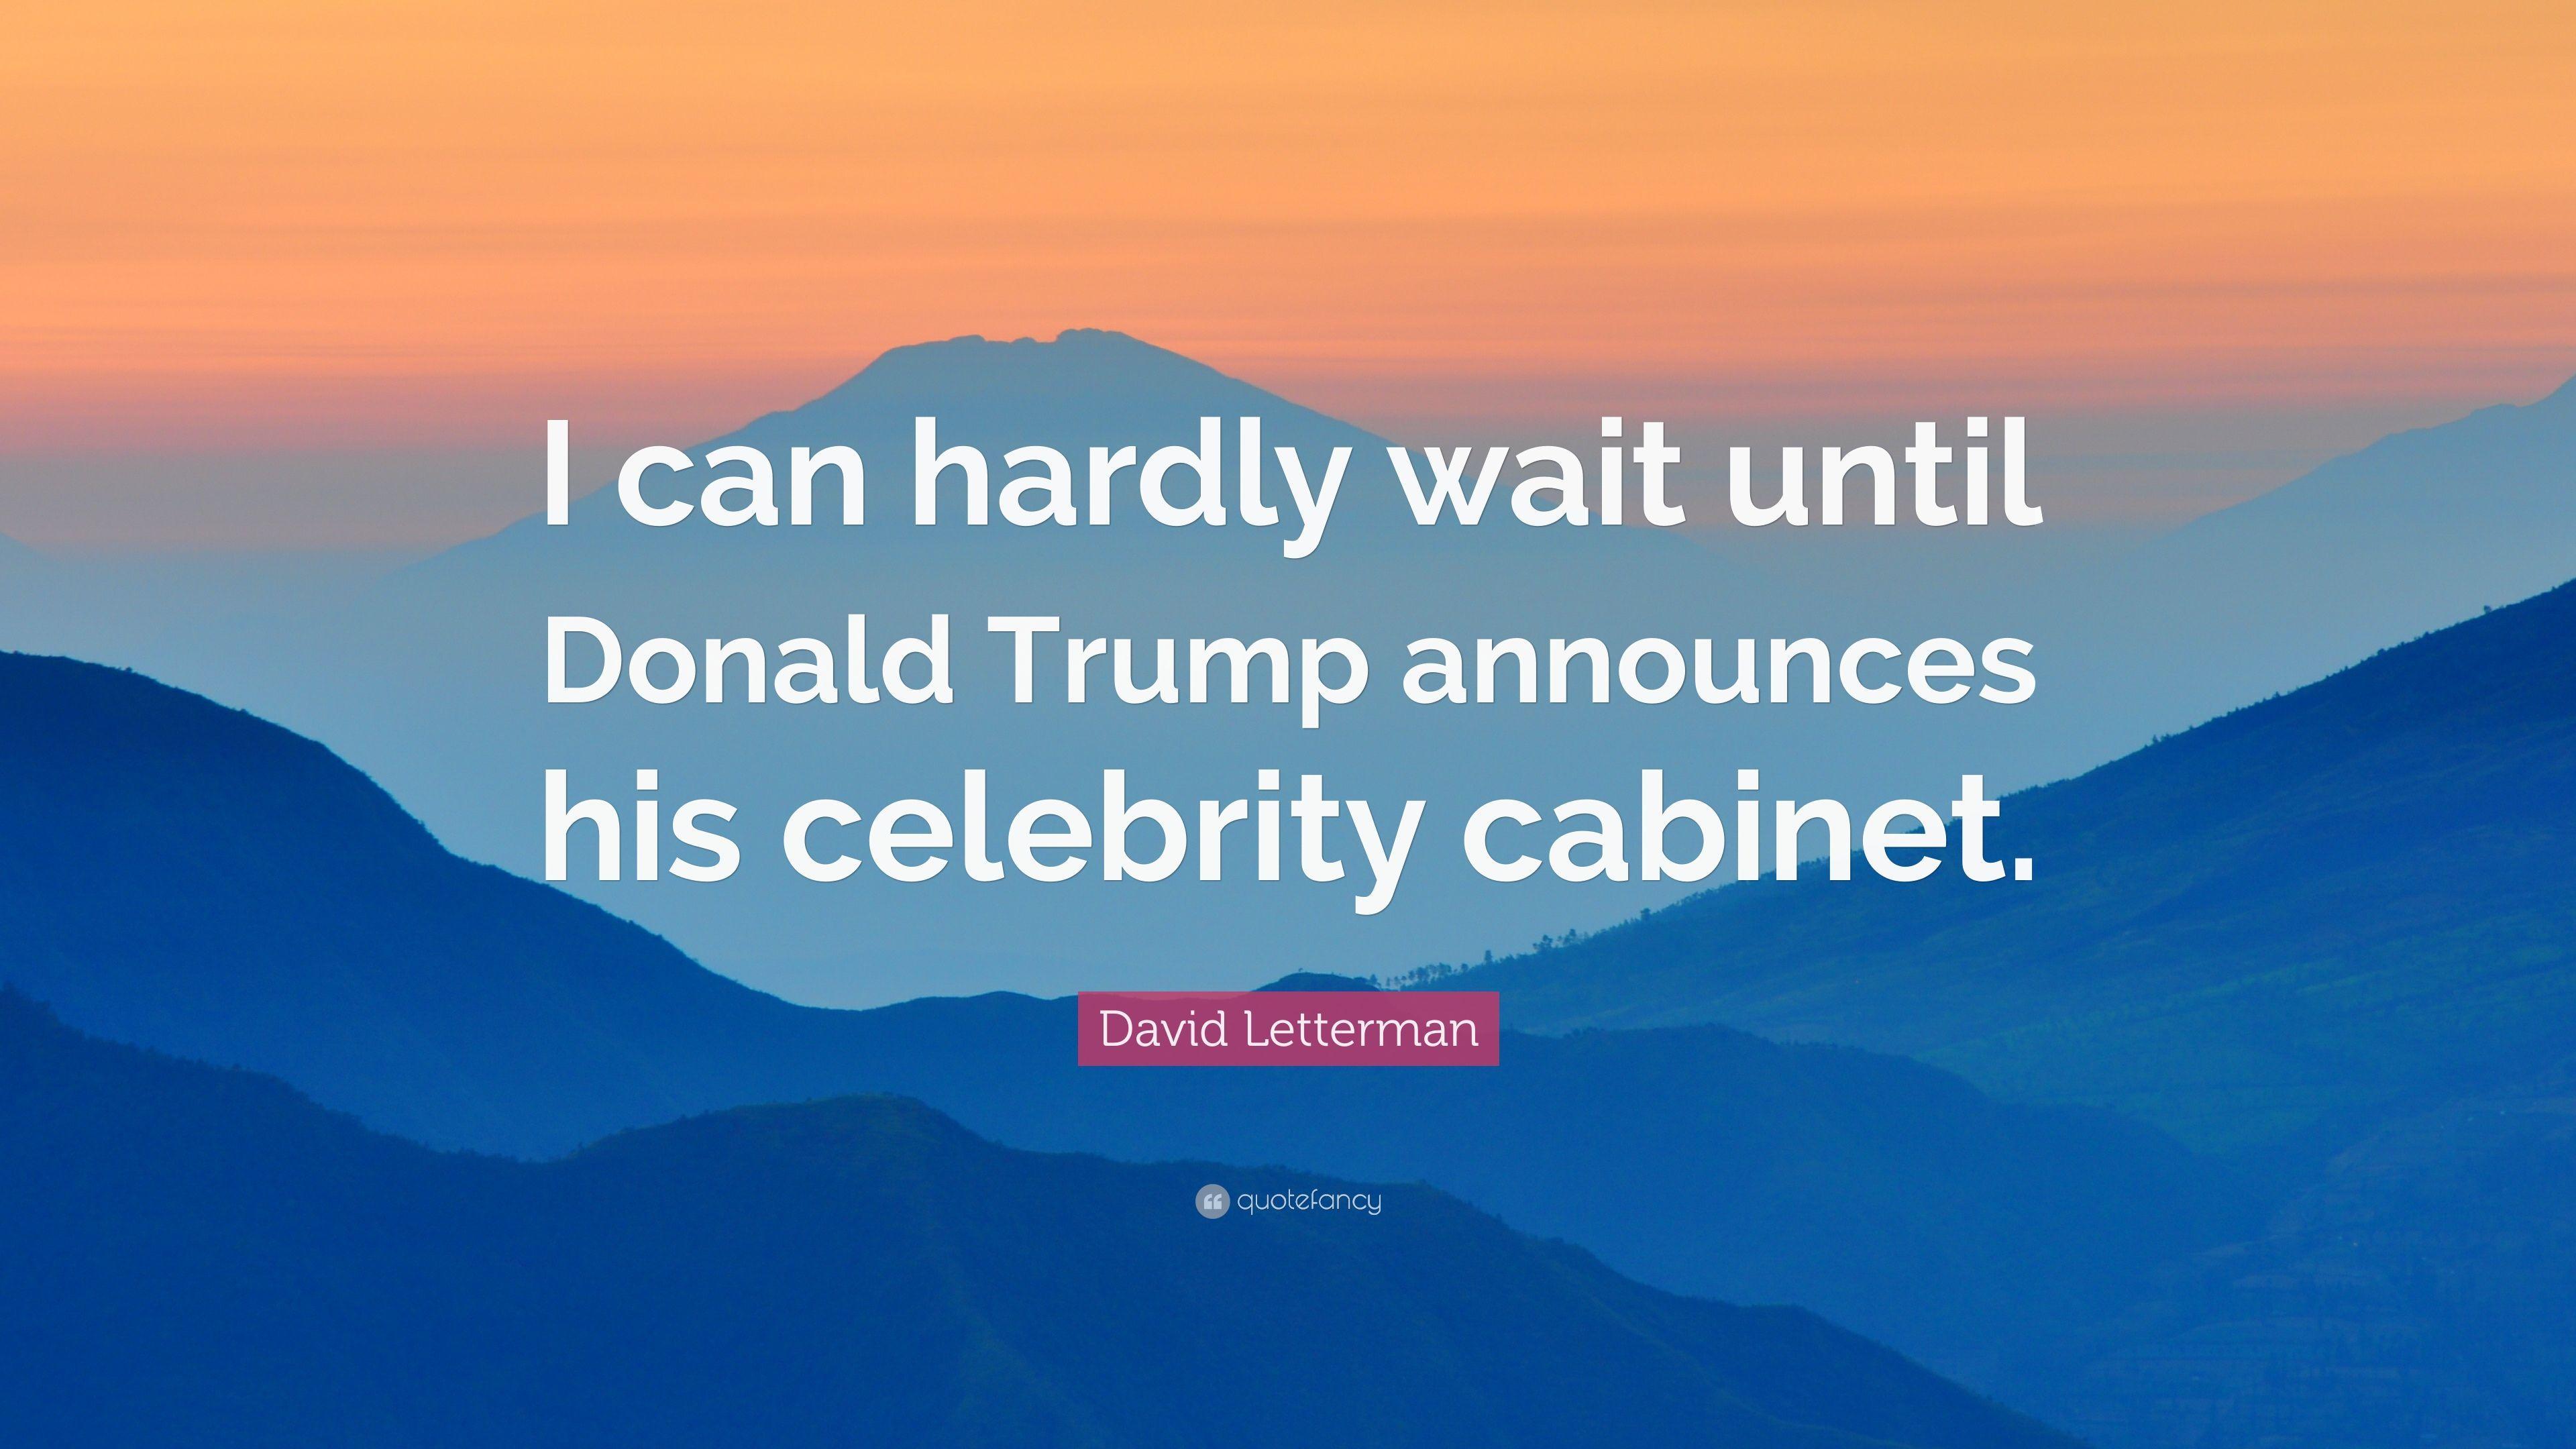 David Letterman Quote: “I can hardly wait until Donald Trump